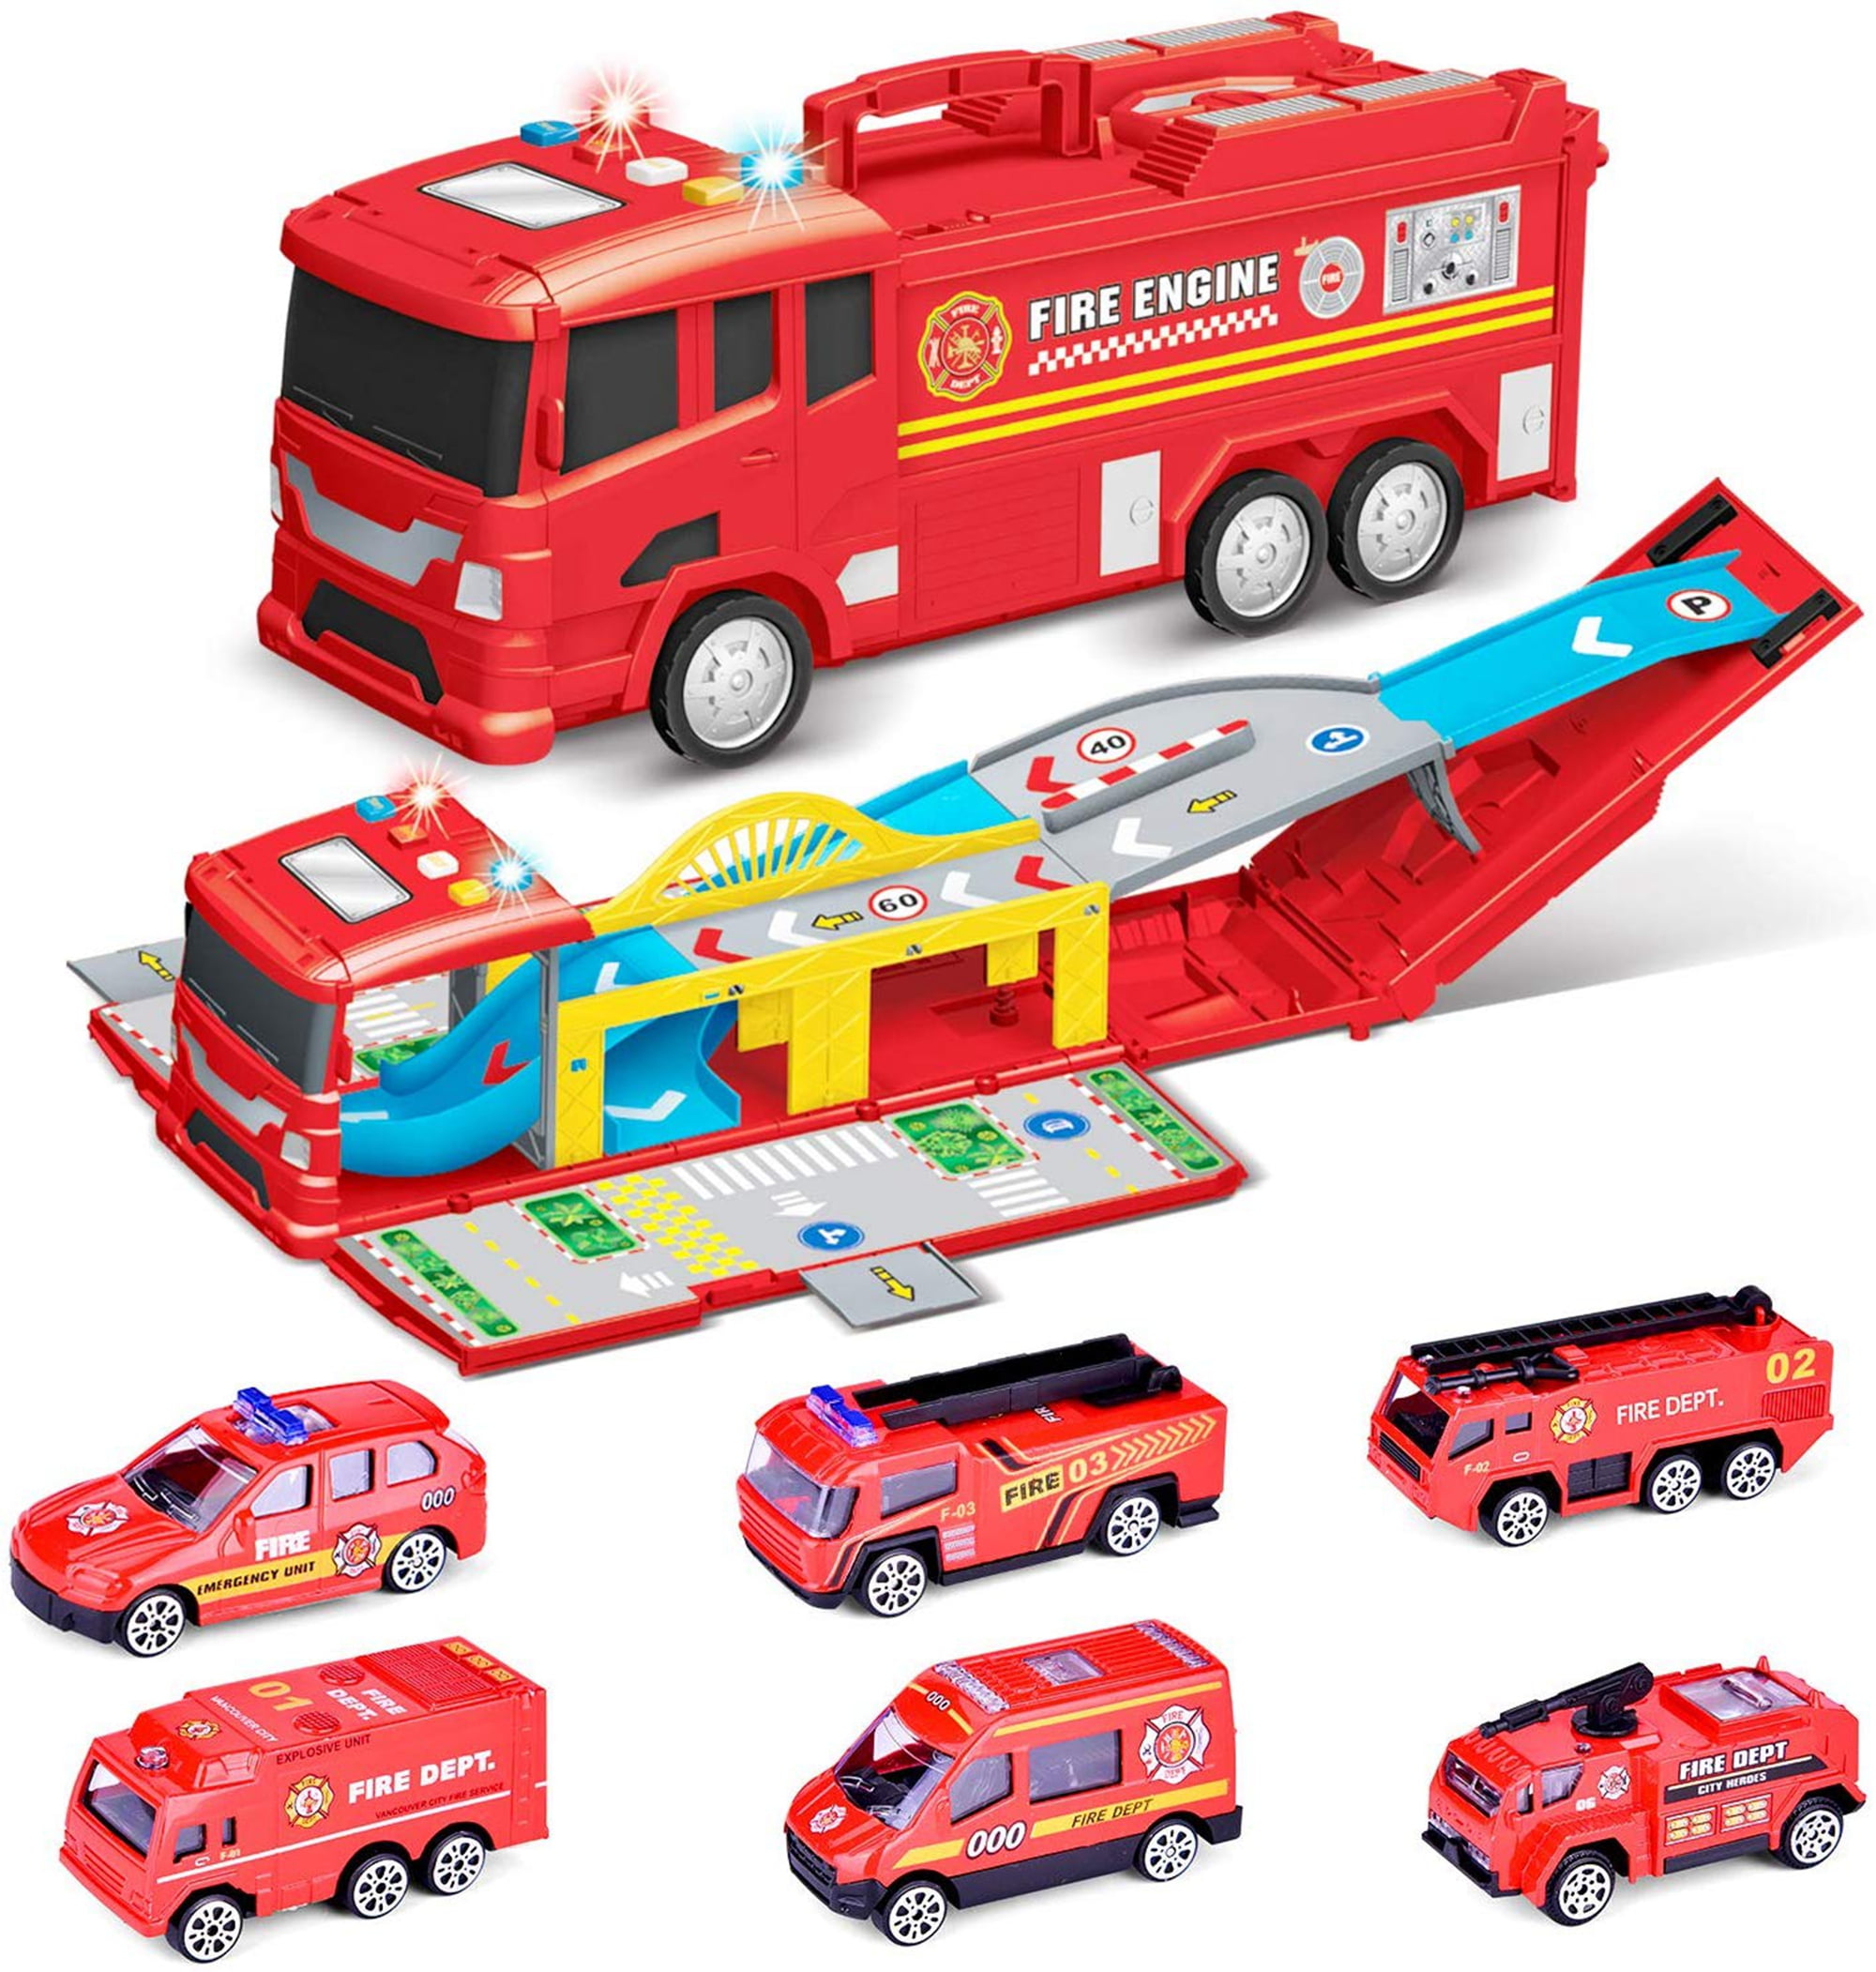 96BC B760 1:64 Scale Alloy Fire Fighting Truck Fire Engine Car Children Toy Gift 